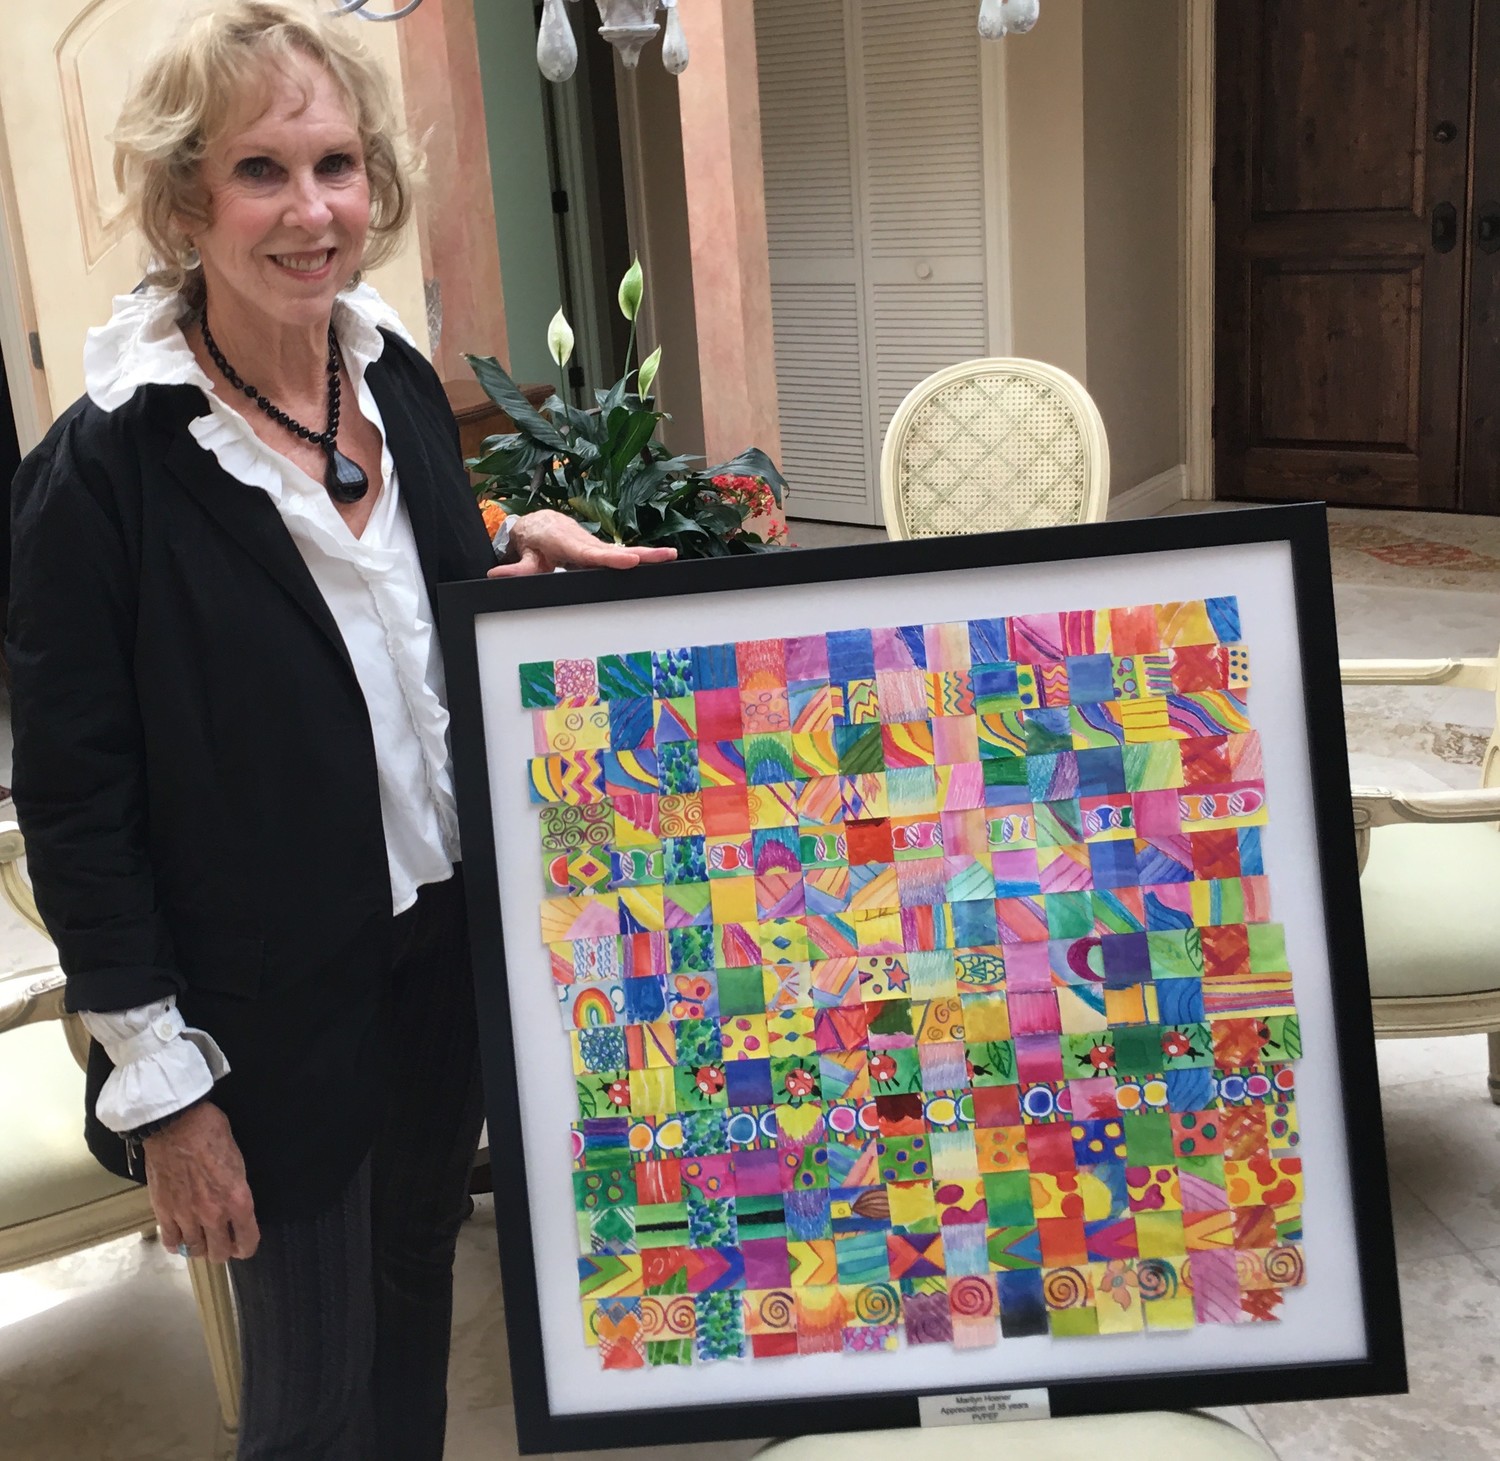 Marilyn Hoener poses with “The Thank You Art” artwork created by Ocean Palms Elementary students that was given to Hoener to thank her for 35 years of service with PVPEF.